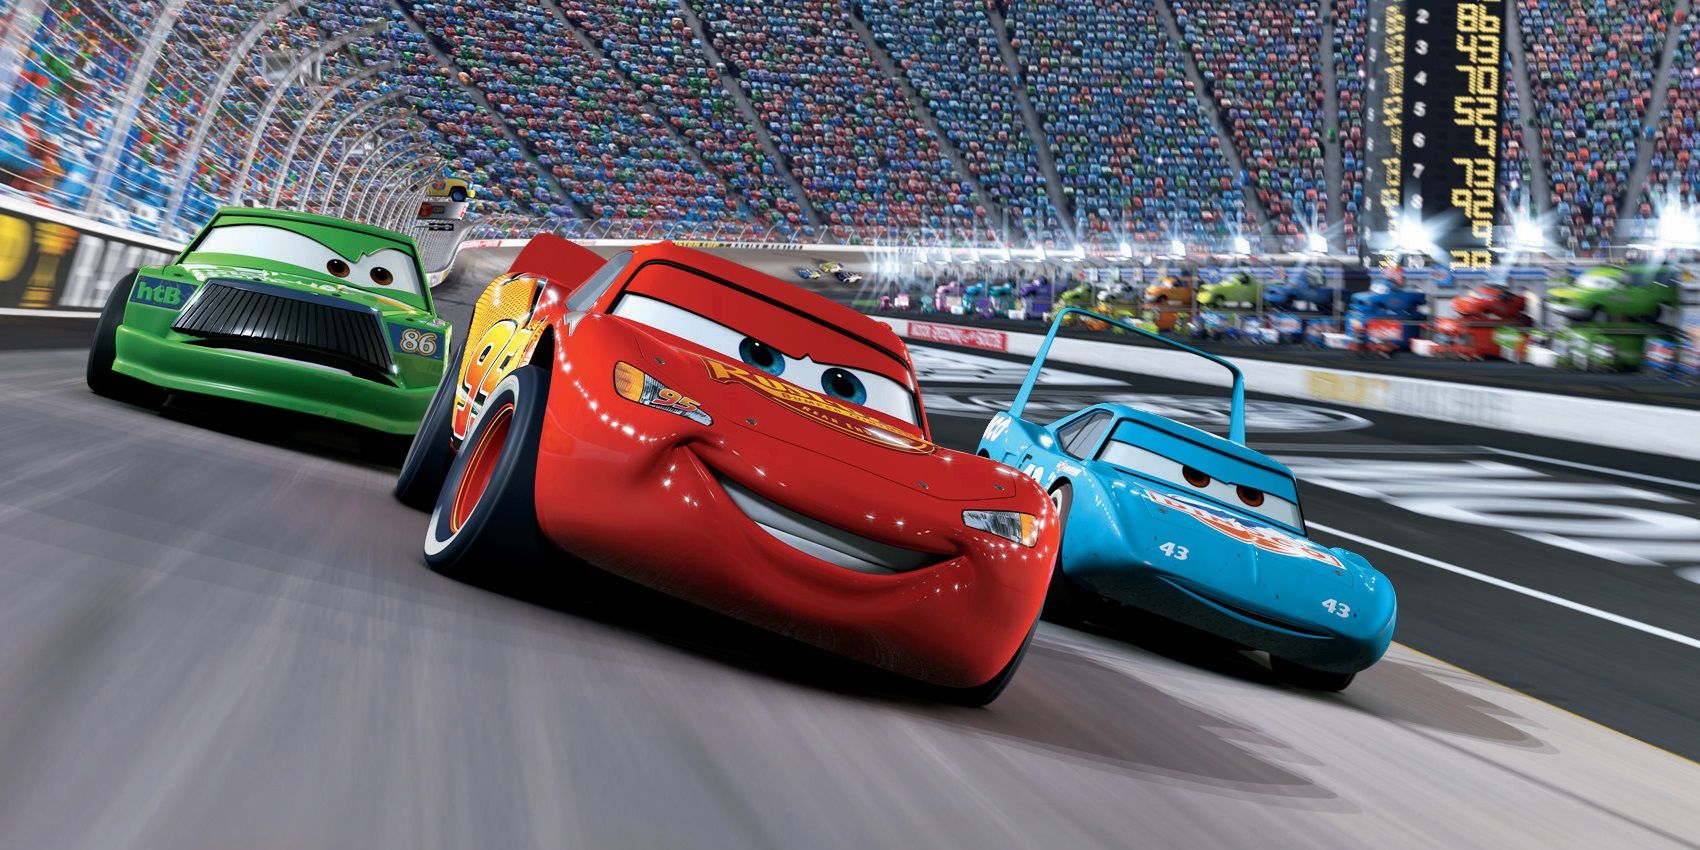 Lightning McQueen on the racetrack in Cars